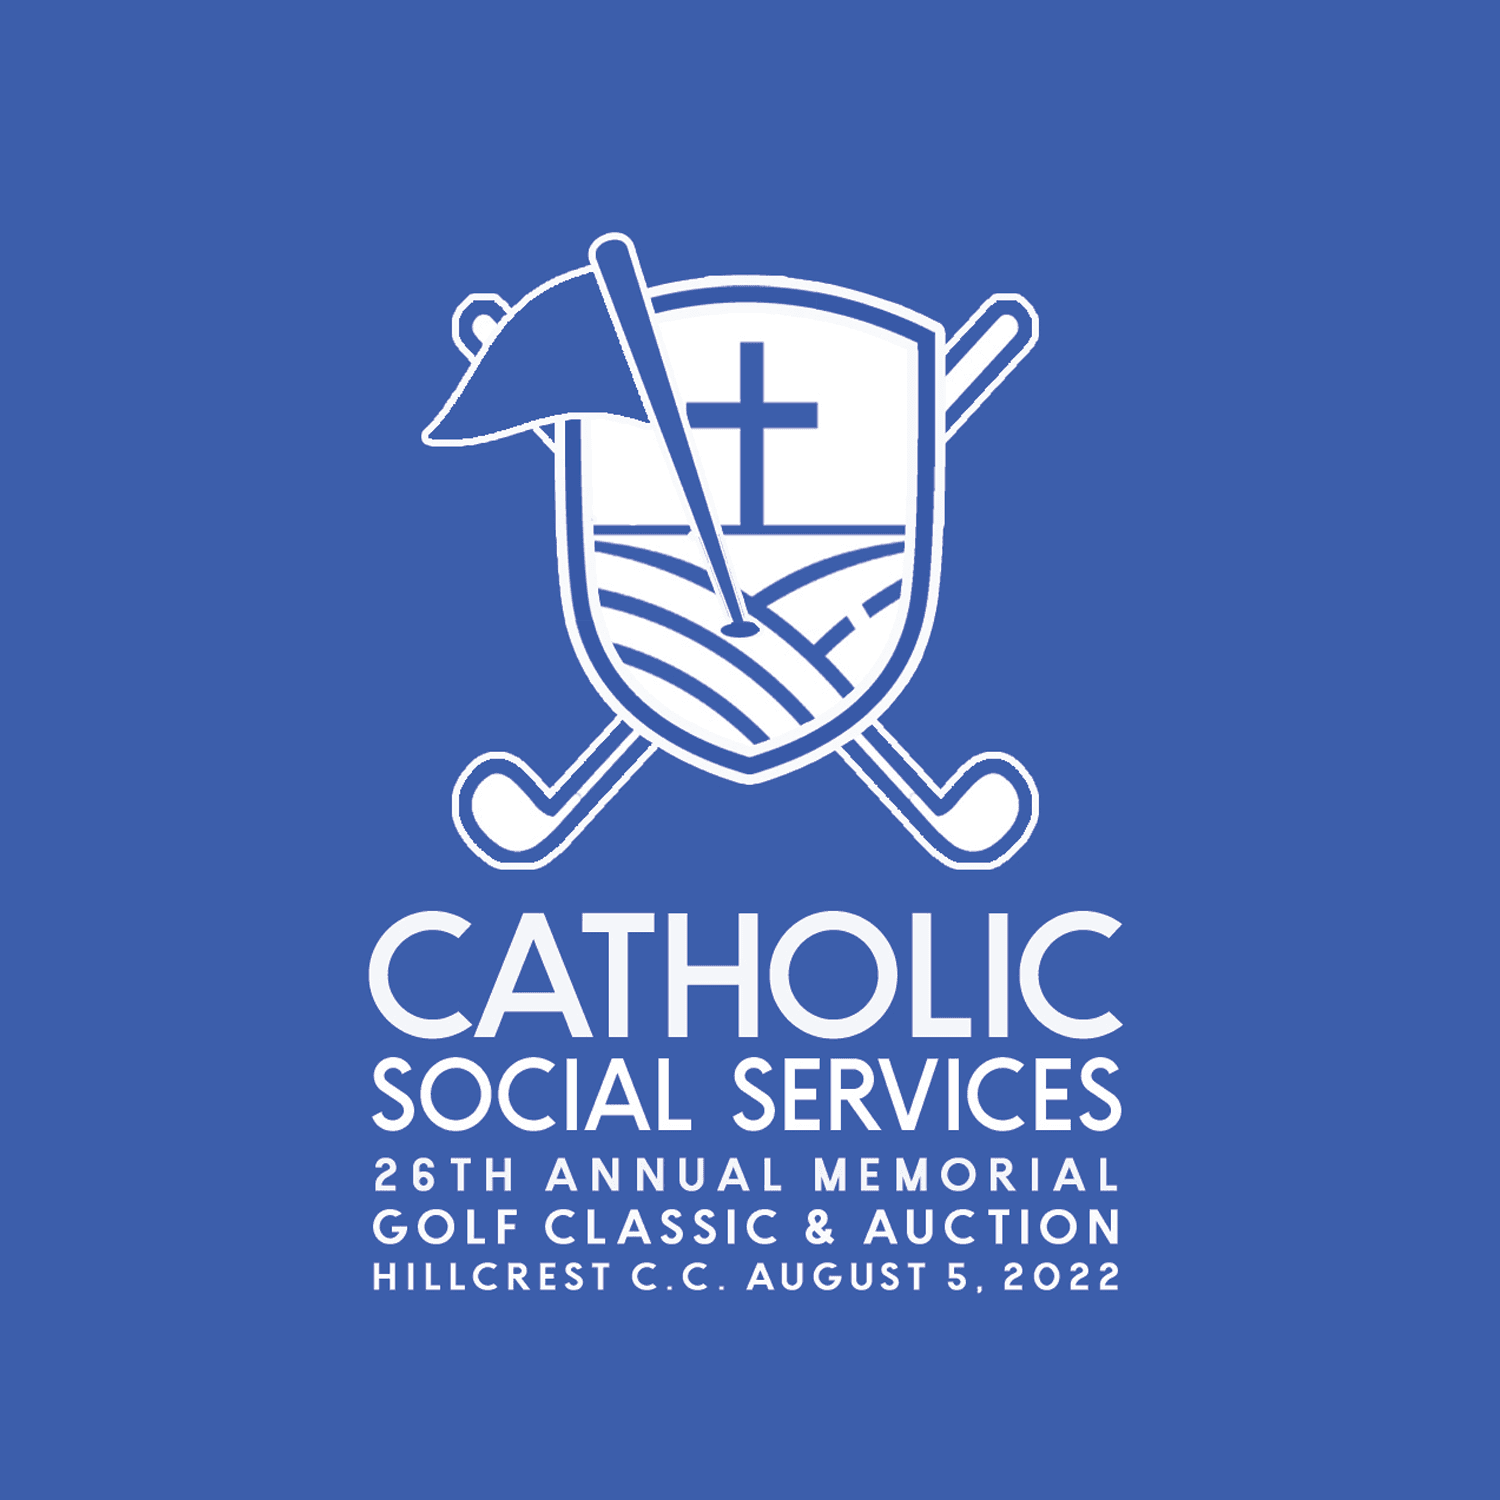 Catholic Social Services Memorial Golf Classic & Auction Set for August 5